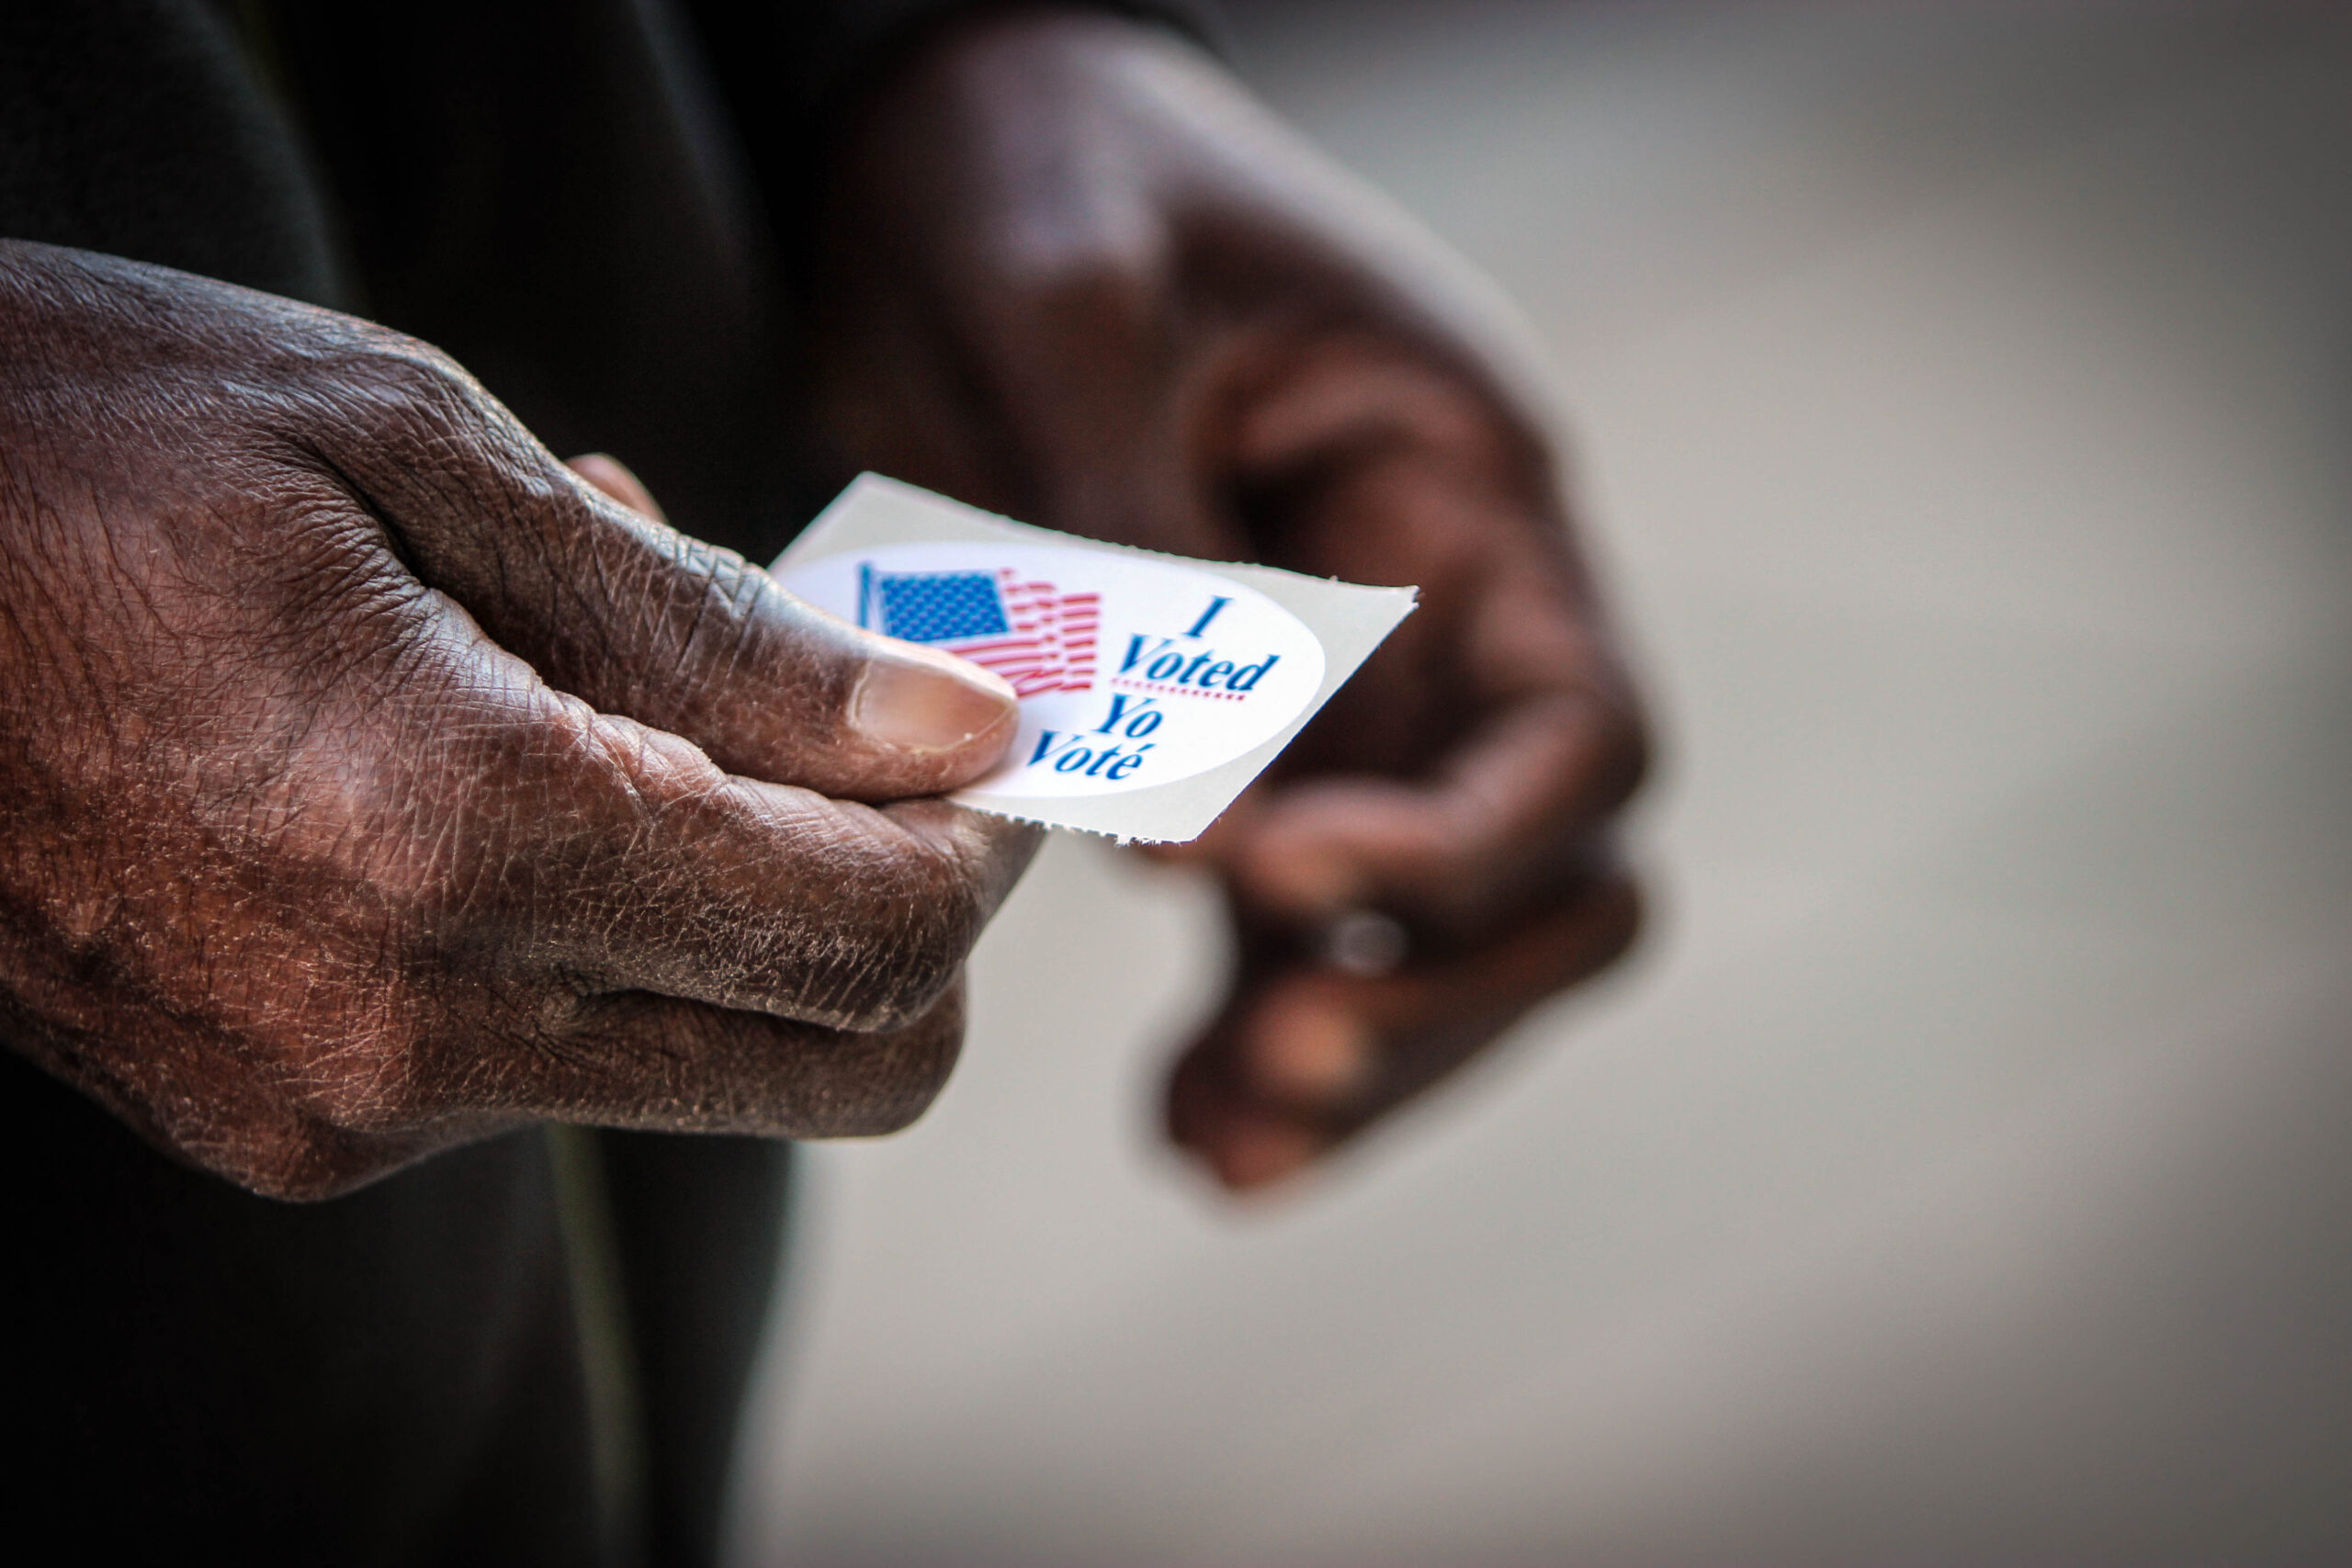 Hands of Black man holding an "I Voted" sticker.